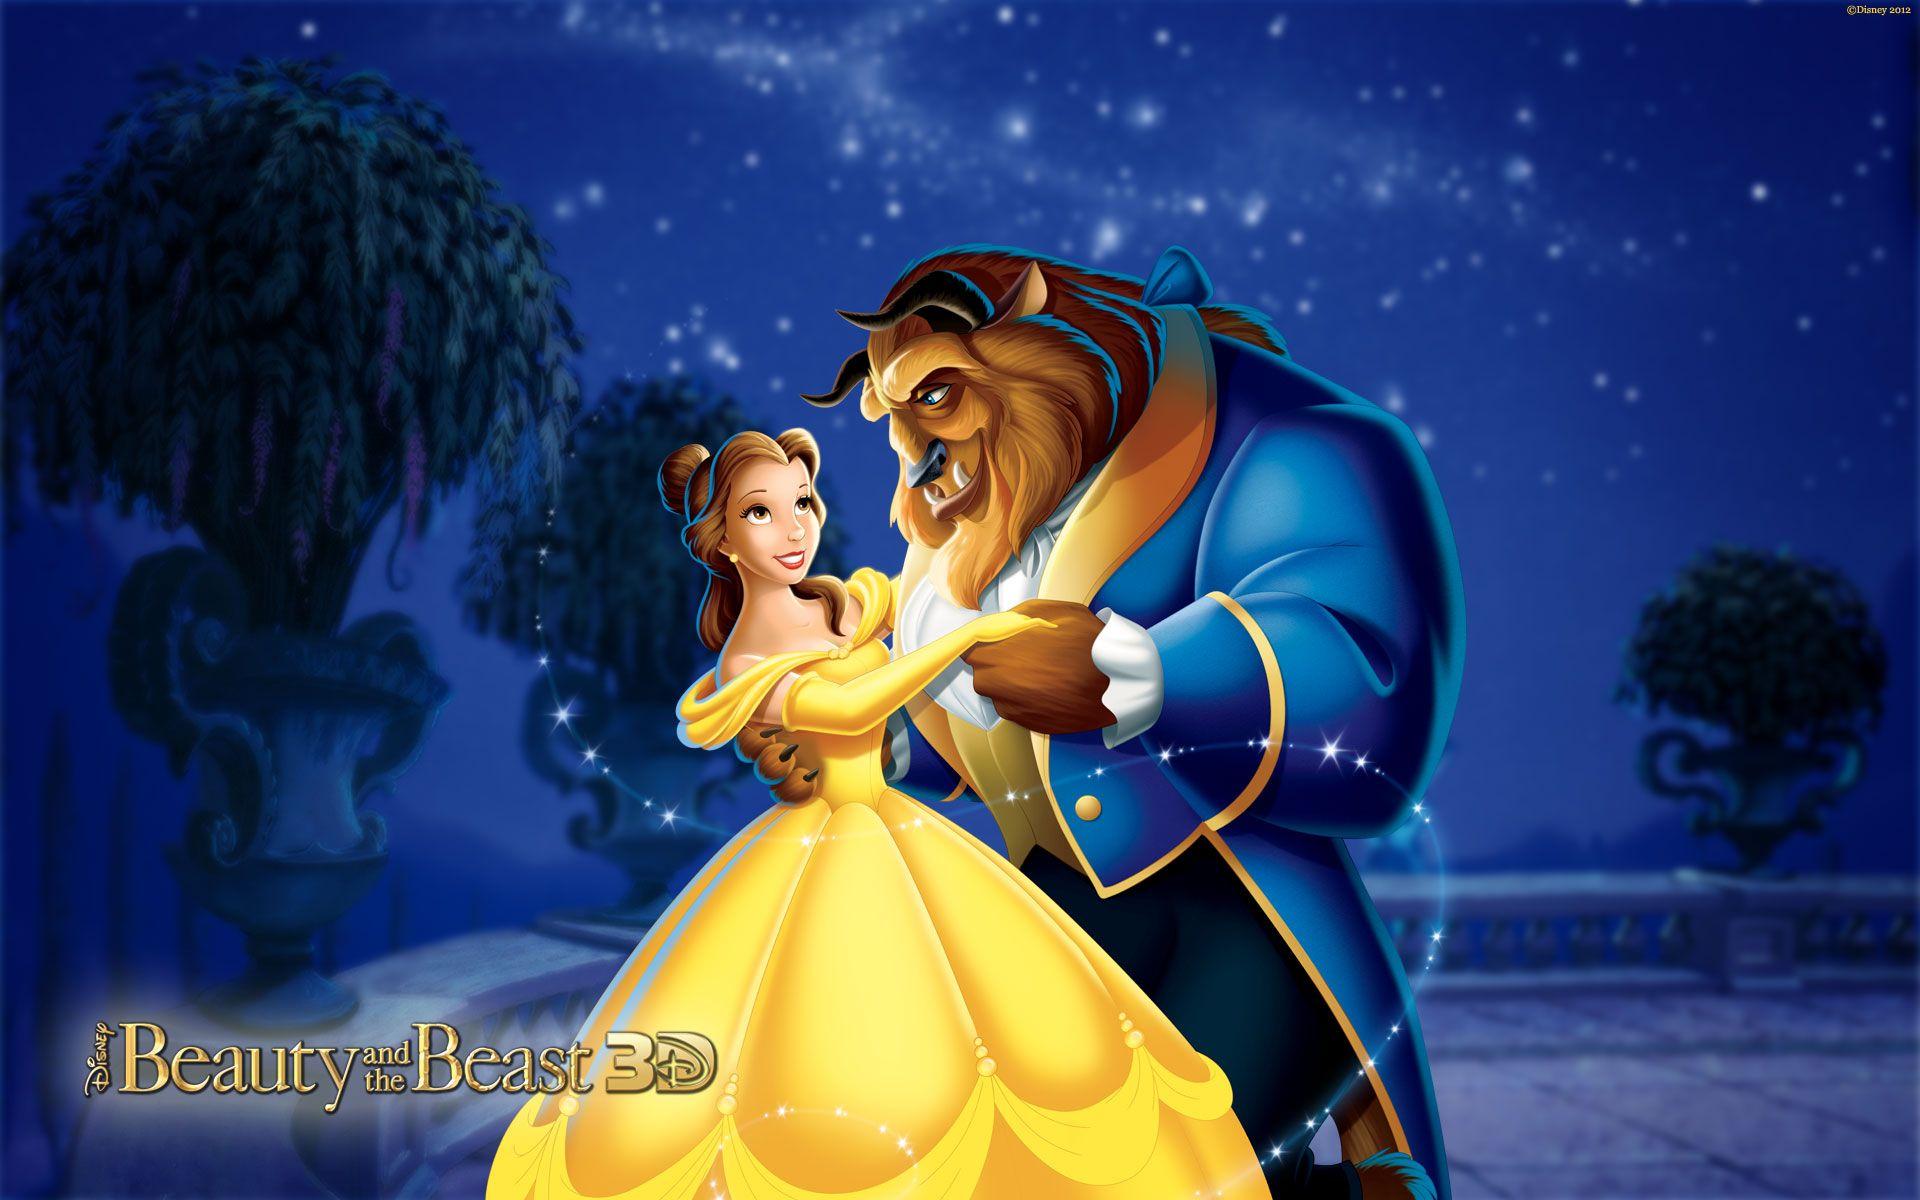 Beauty and the Beast Movie Full HD Wallpaper for iPad